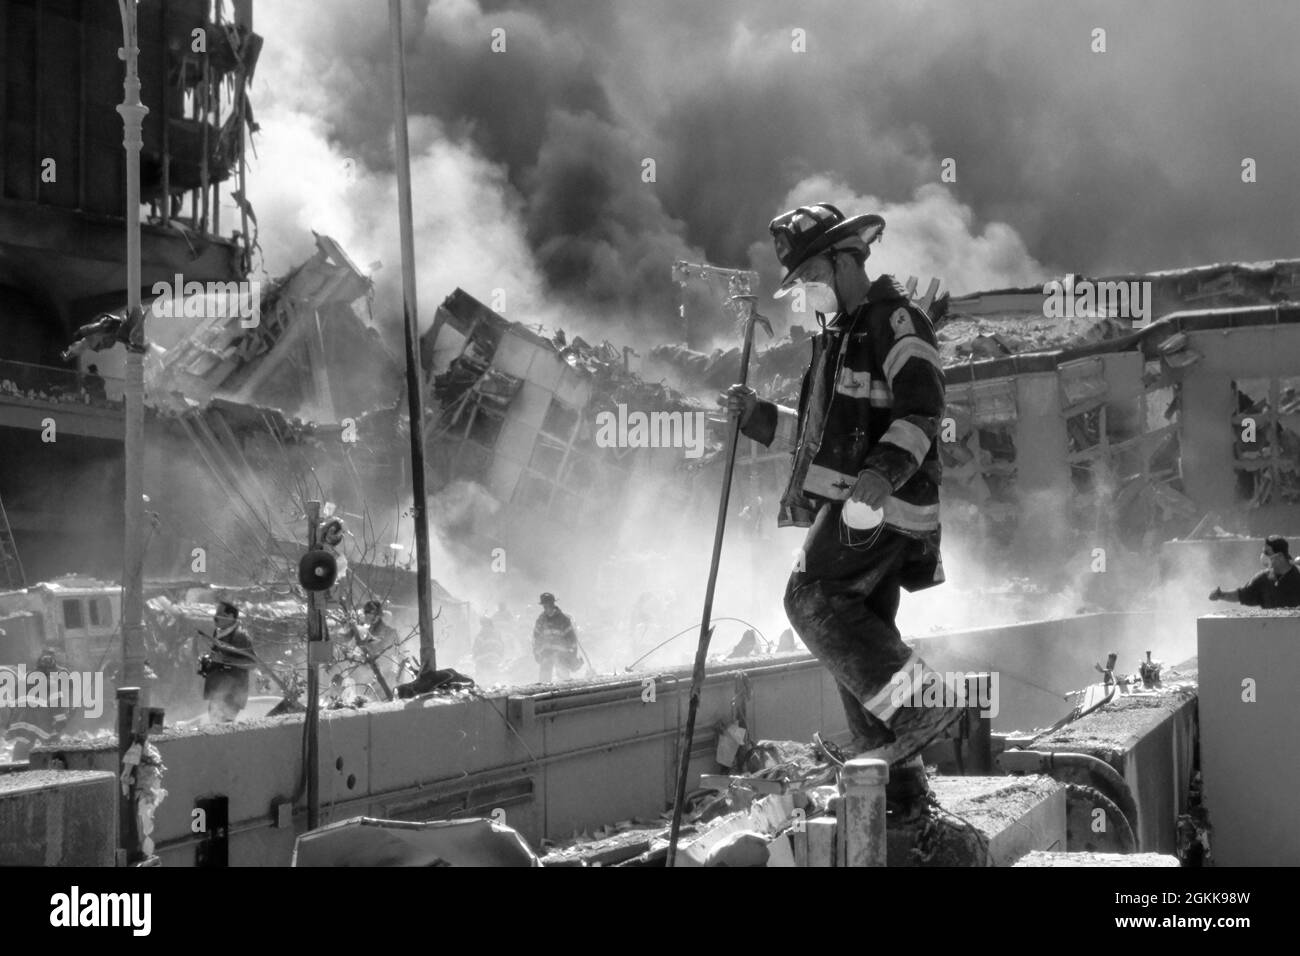 FDNY firefighter amongst the rubble as the Twin Towers burn during the terrorist attack in New York City on September 11, 2001. (USA) Stock Photo